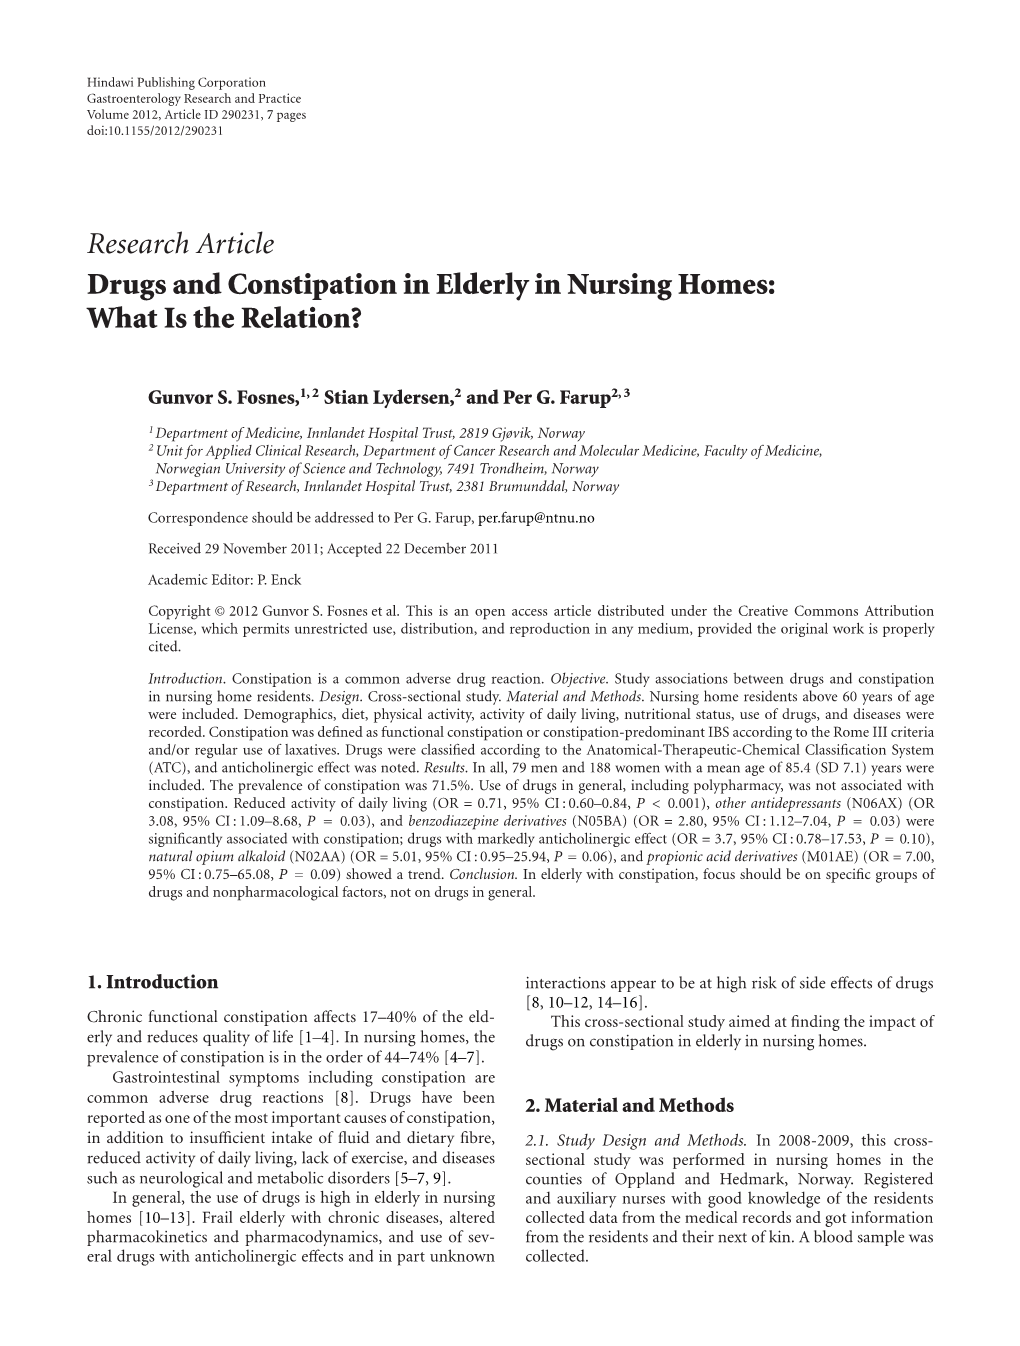 Drugs and Constipation in Elderly in Nursing Homes: What Is the Relation?